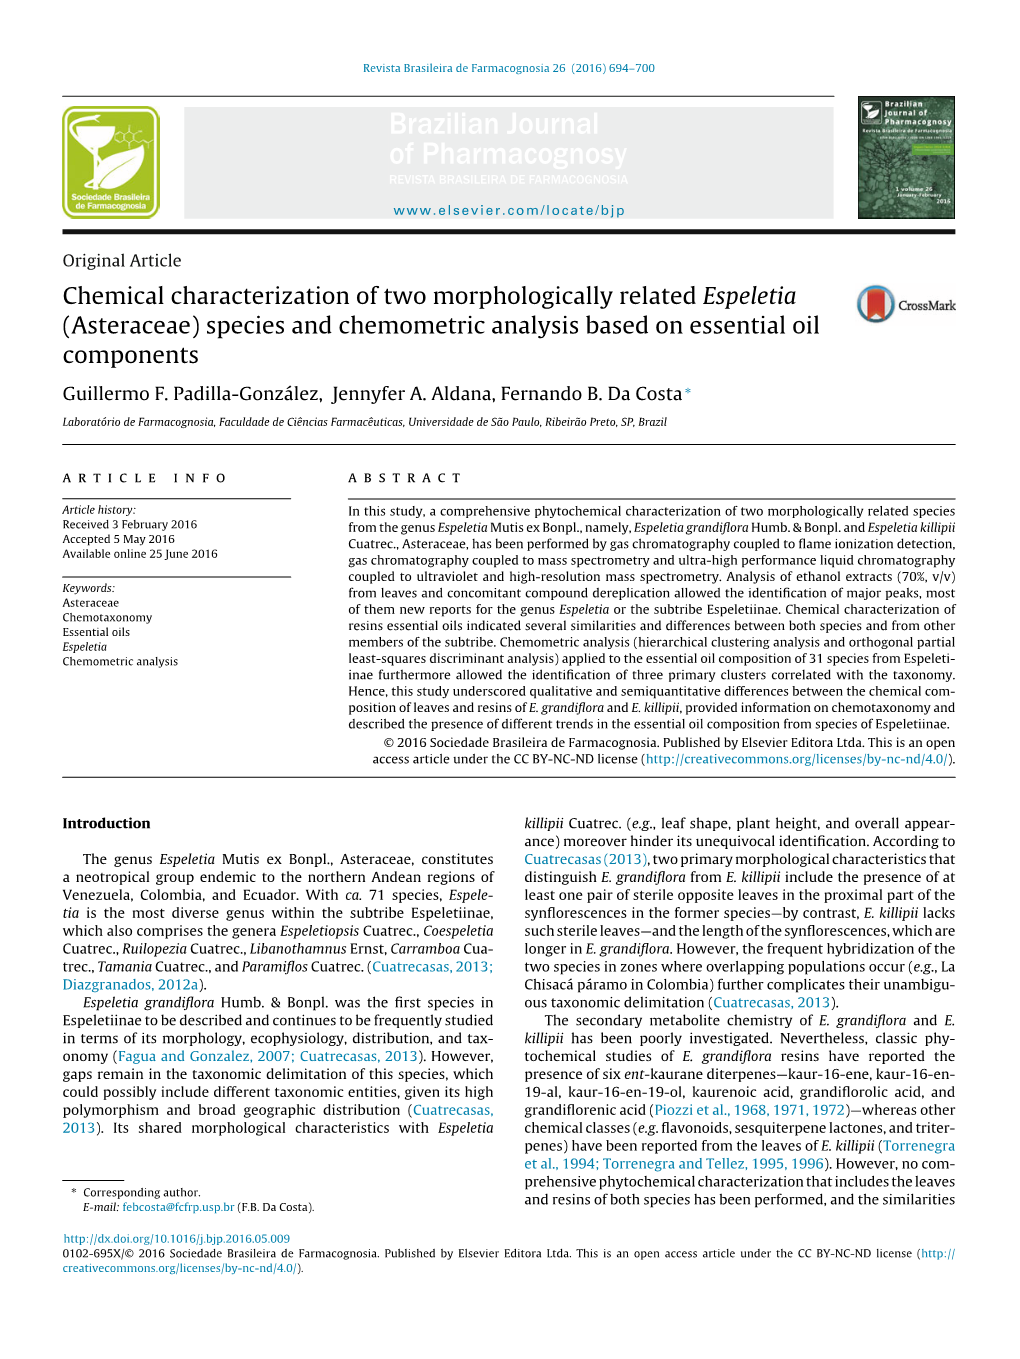 Chemical Characterization of Two Morphologically Related Espeletia (Asteraceae) Species and Chemometric Analysis Based on Essent